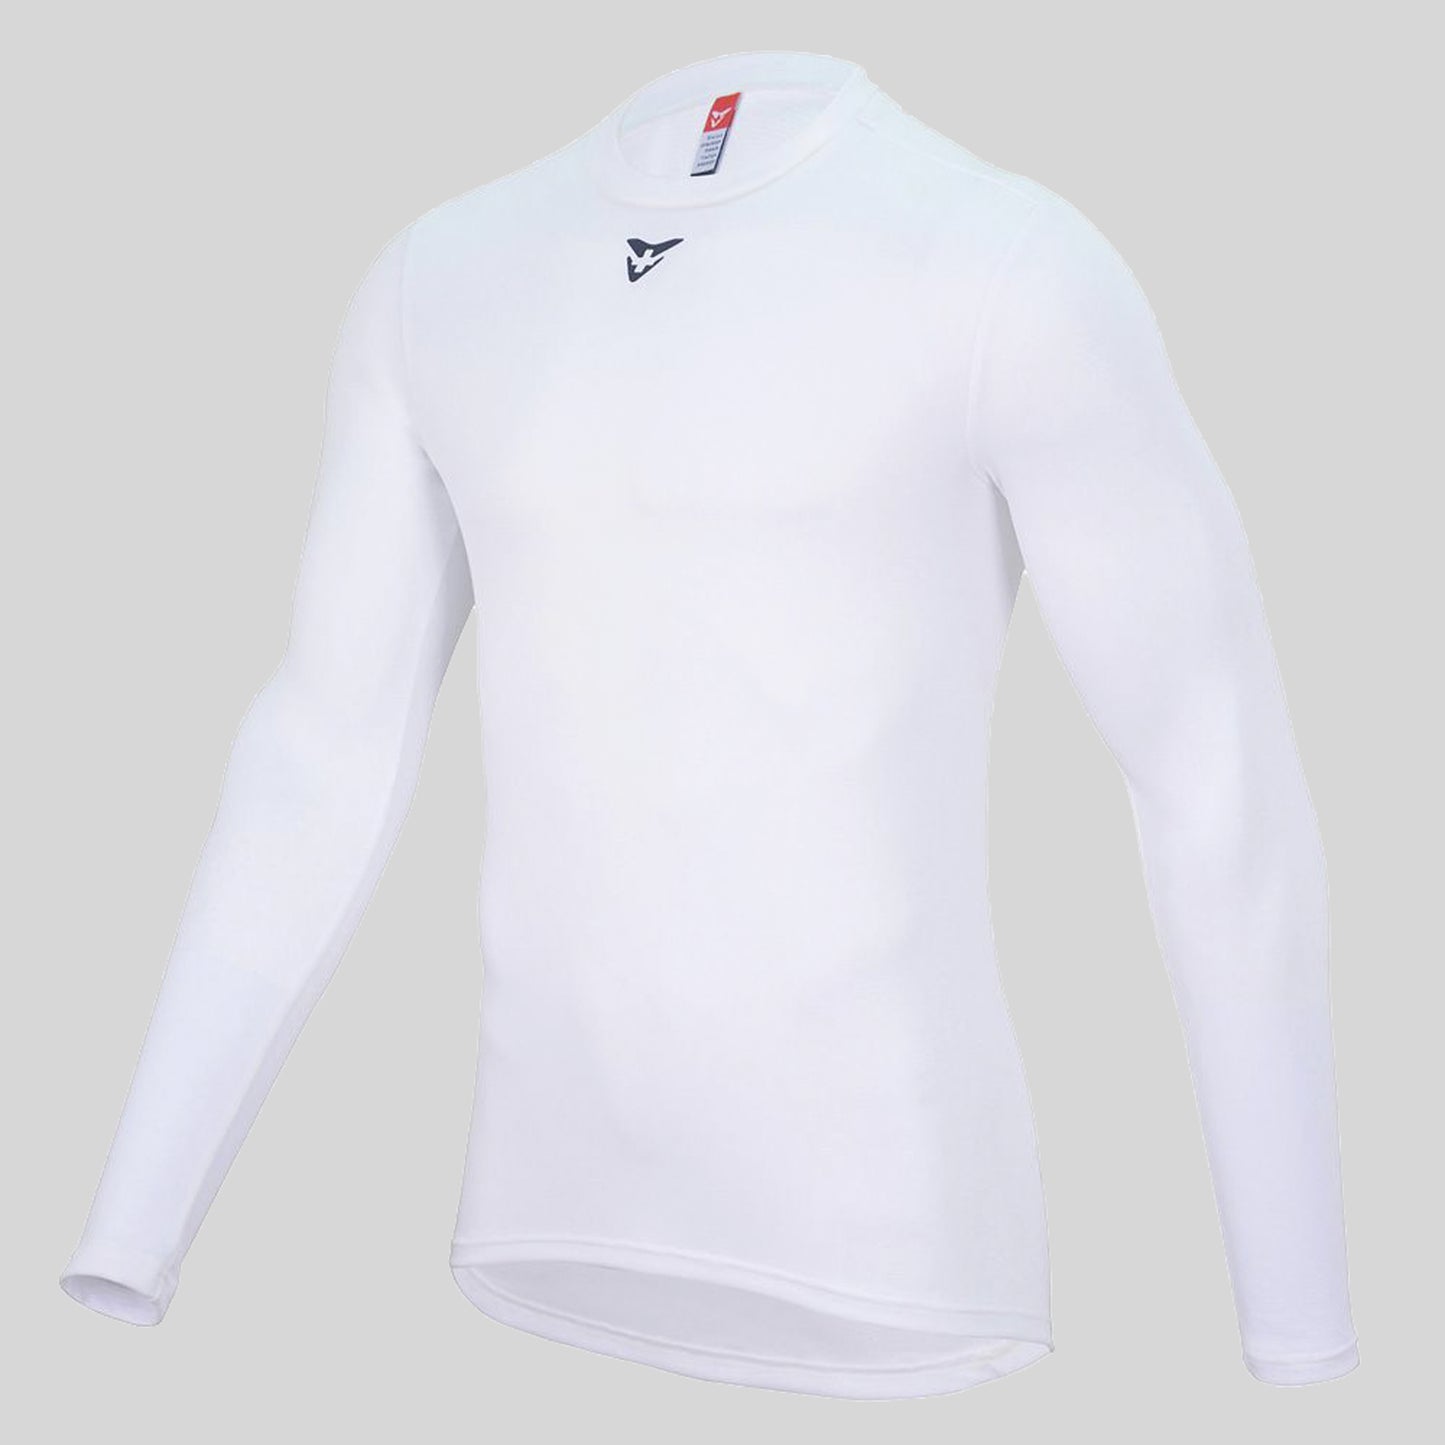 Long Sleeve Baselayer White by Cuore of Switzerland for Ascender Cycling Club Zürich Switzerland Front View